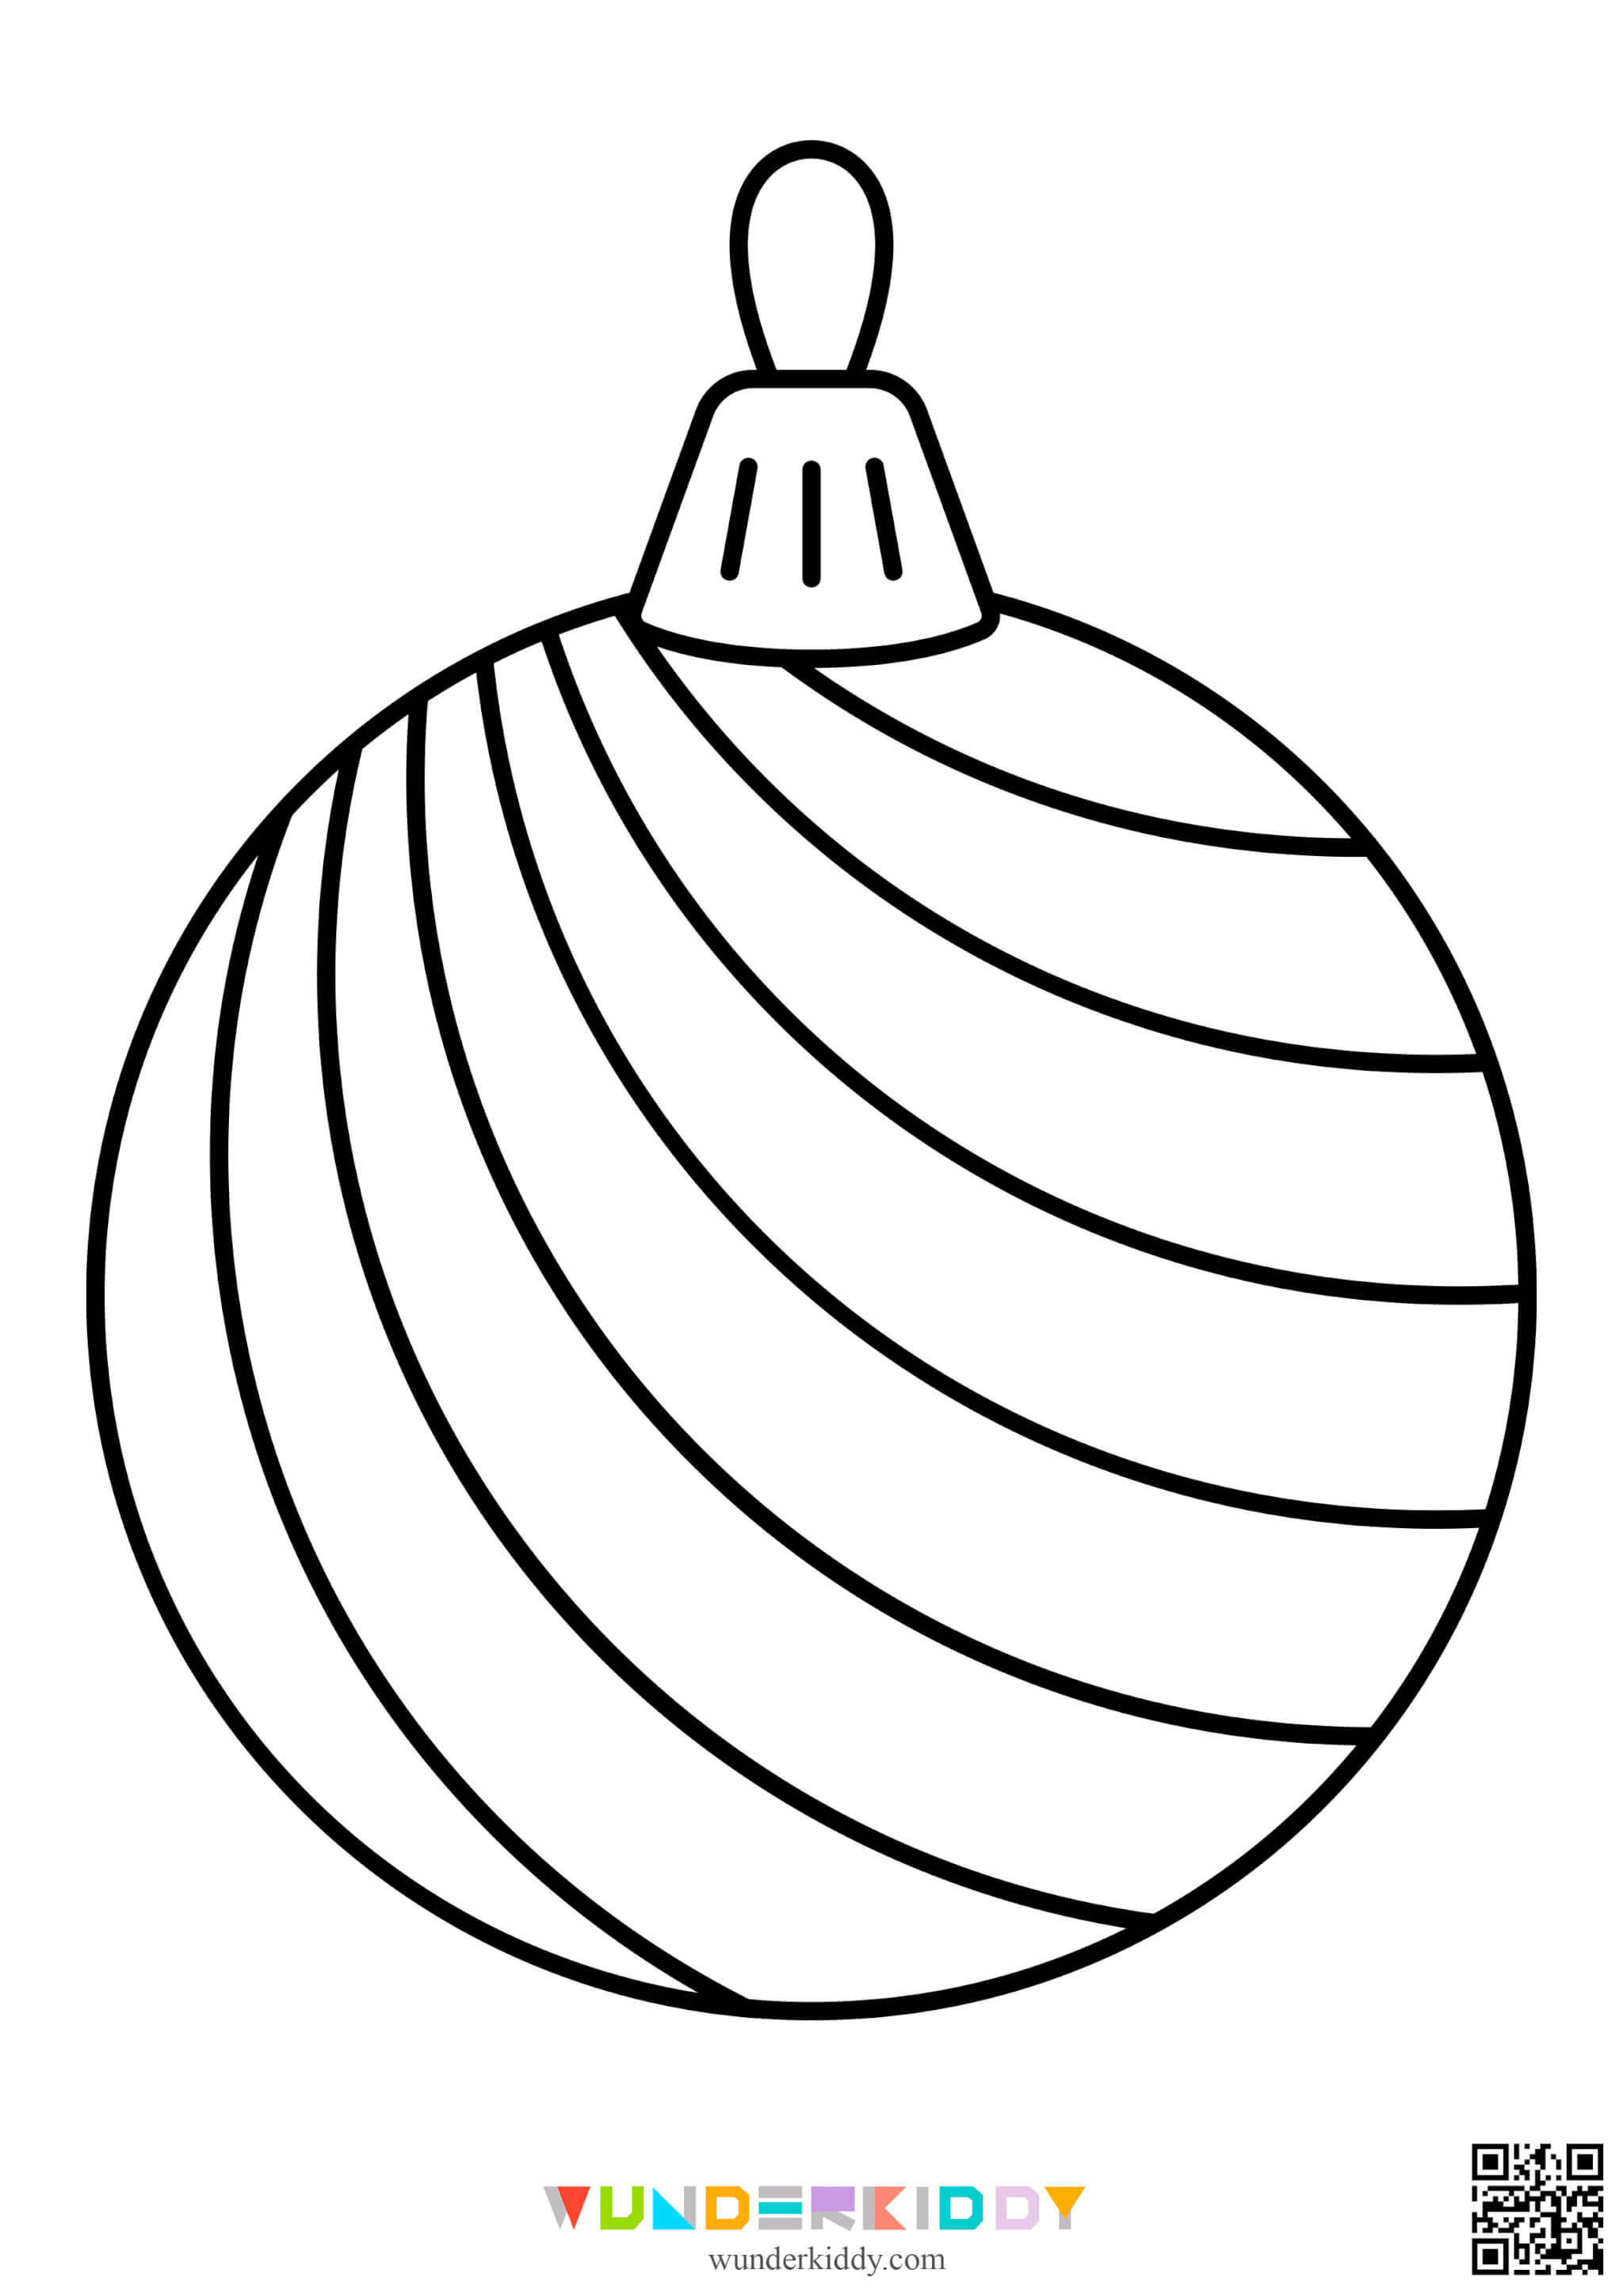 Christmas Ornament Coloring Pages - Image 13